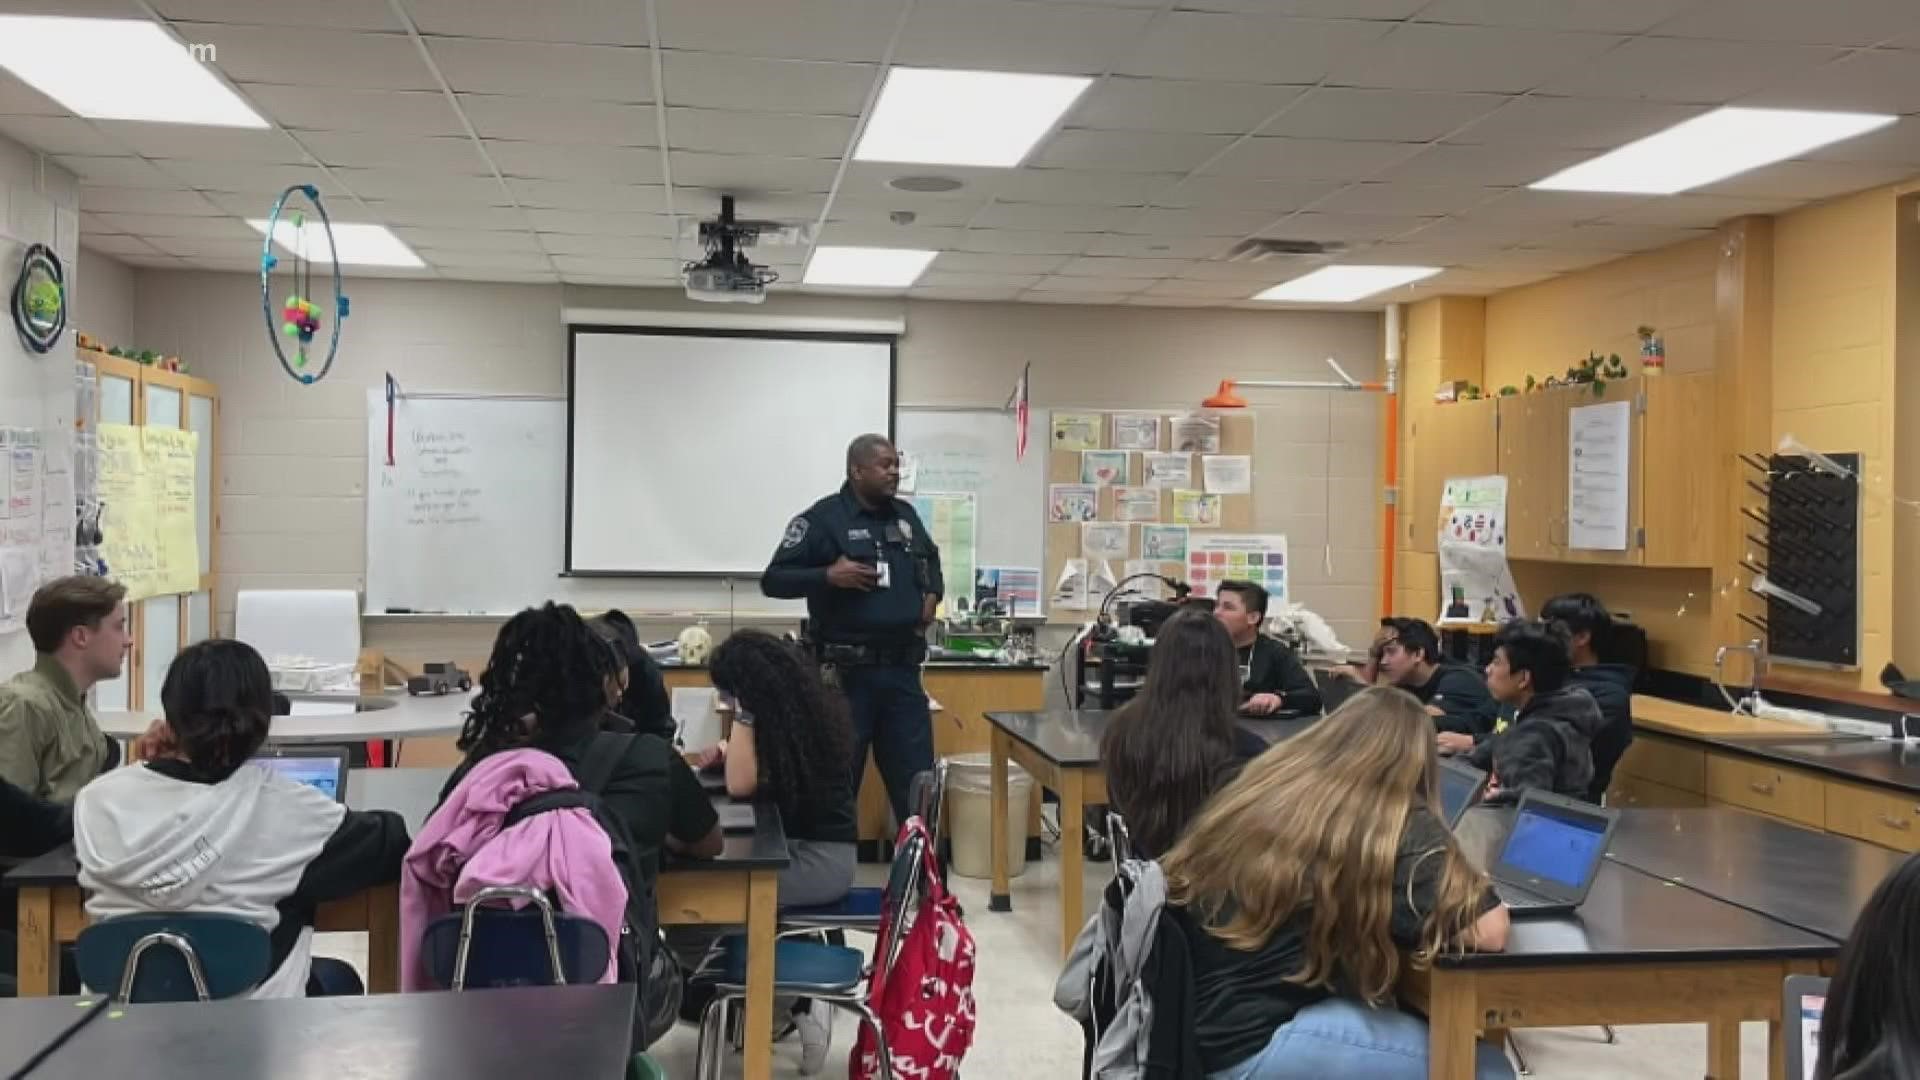 "We went over protons, neutrons, electrons, and how they were discovered," said Officer Undrea Mitchell.